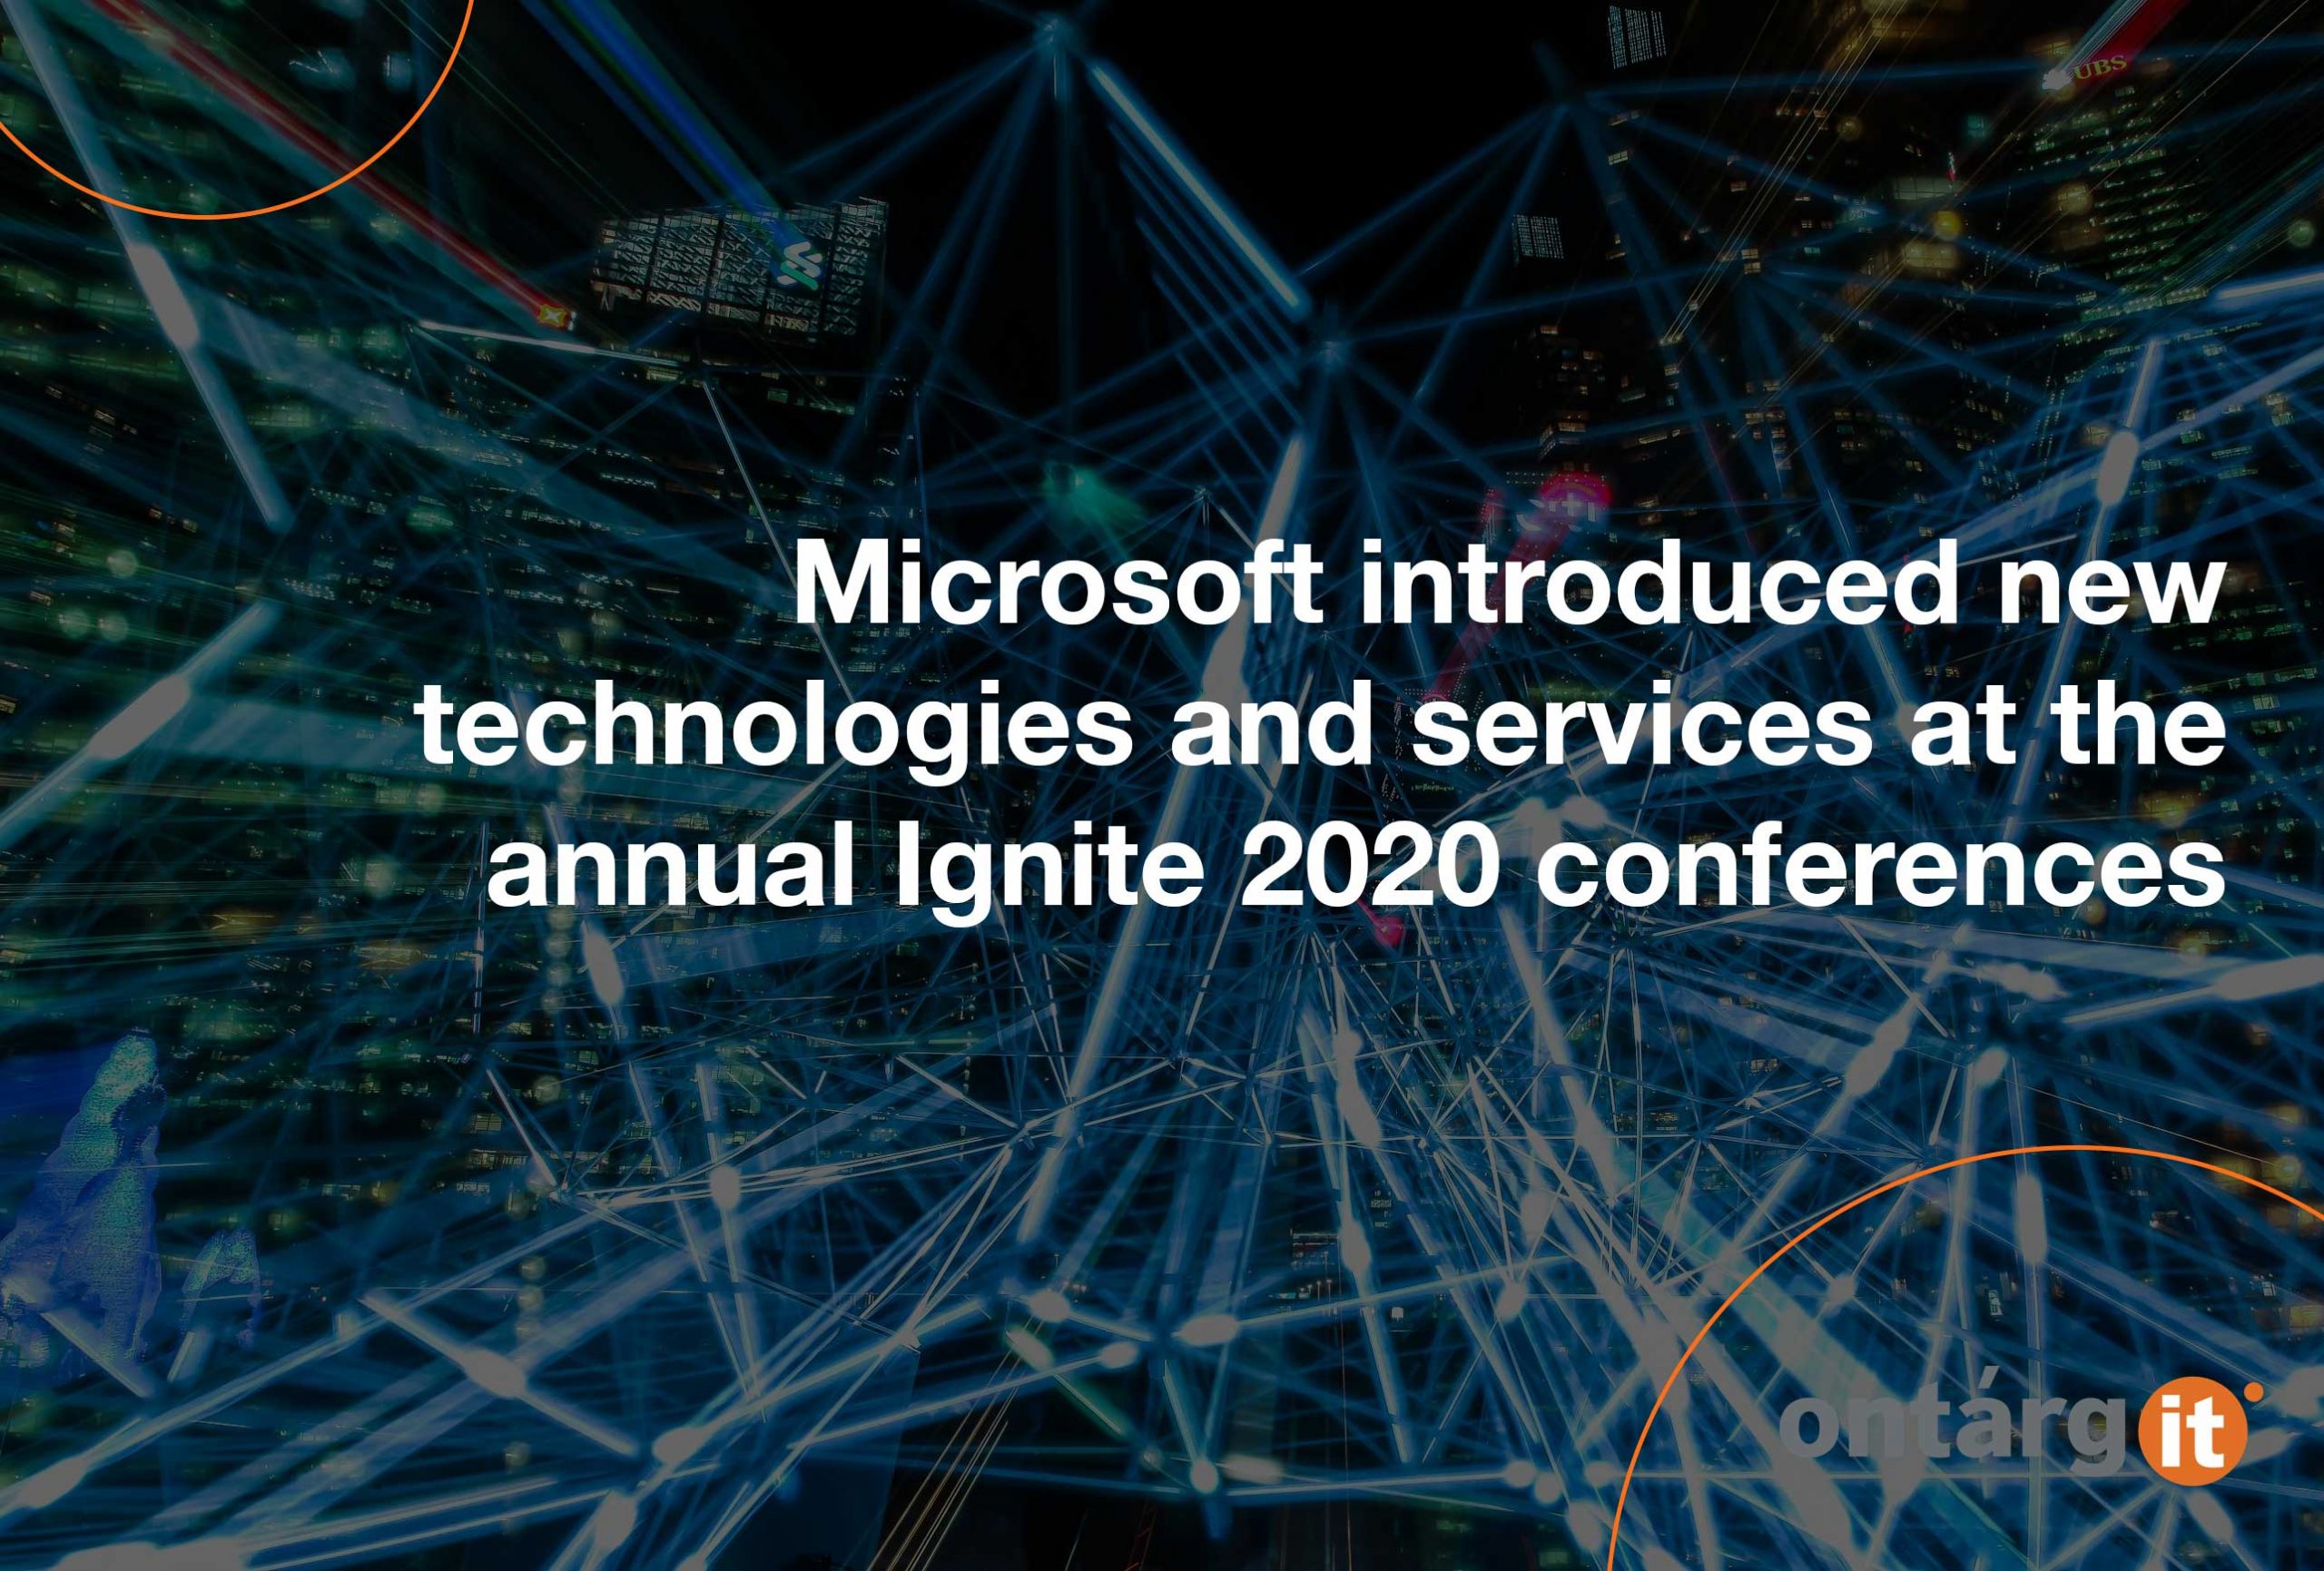 Microsoft introduced new technologies and services at the annual Ignite 2020 conferences